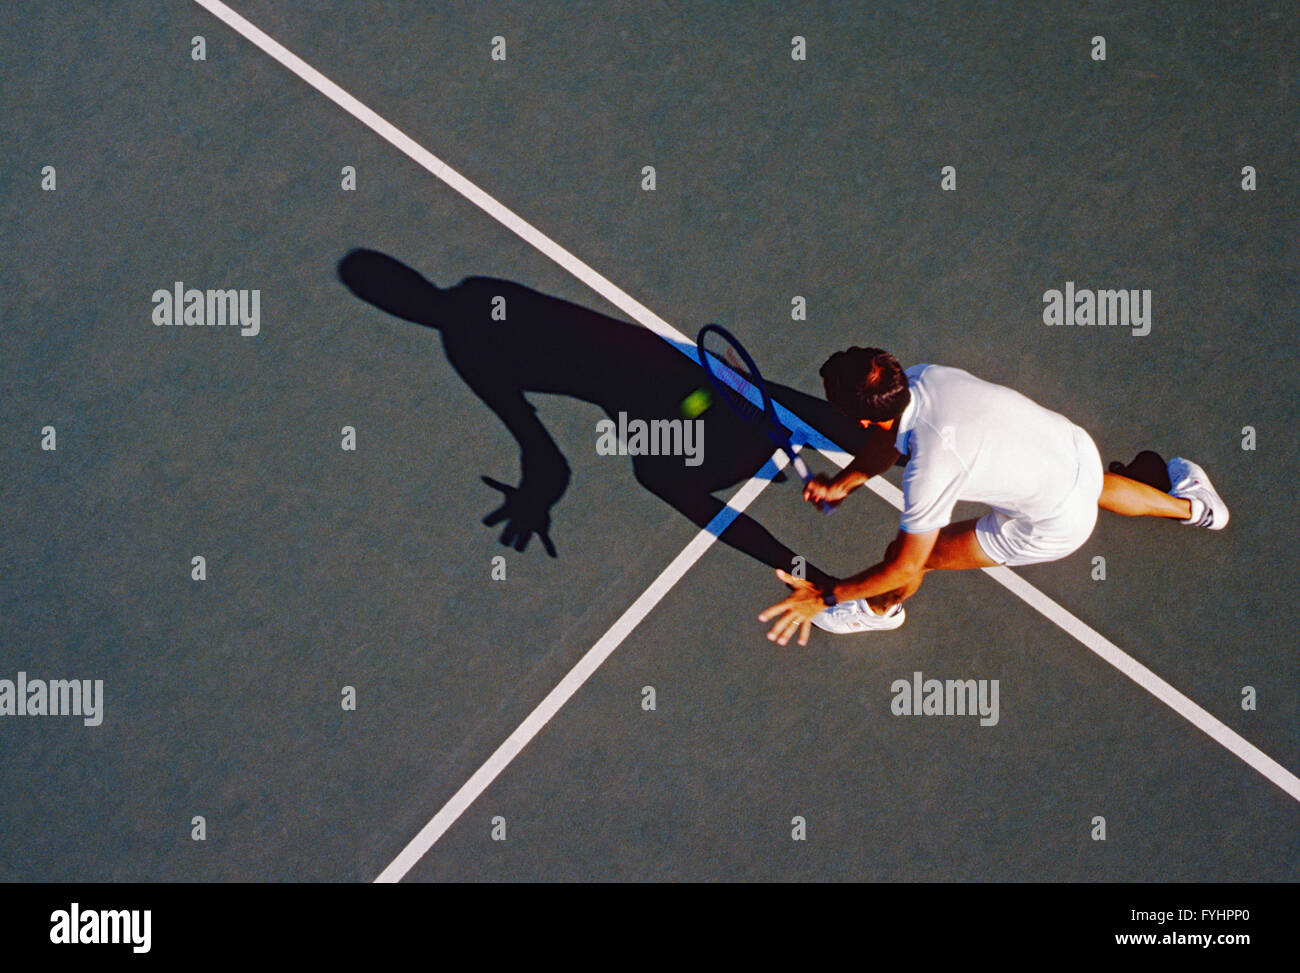 Overhead view of male tennis player hitting the ball with a racket Stock Photo